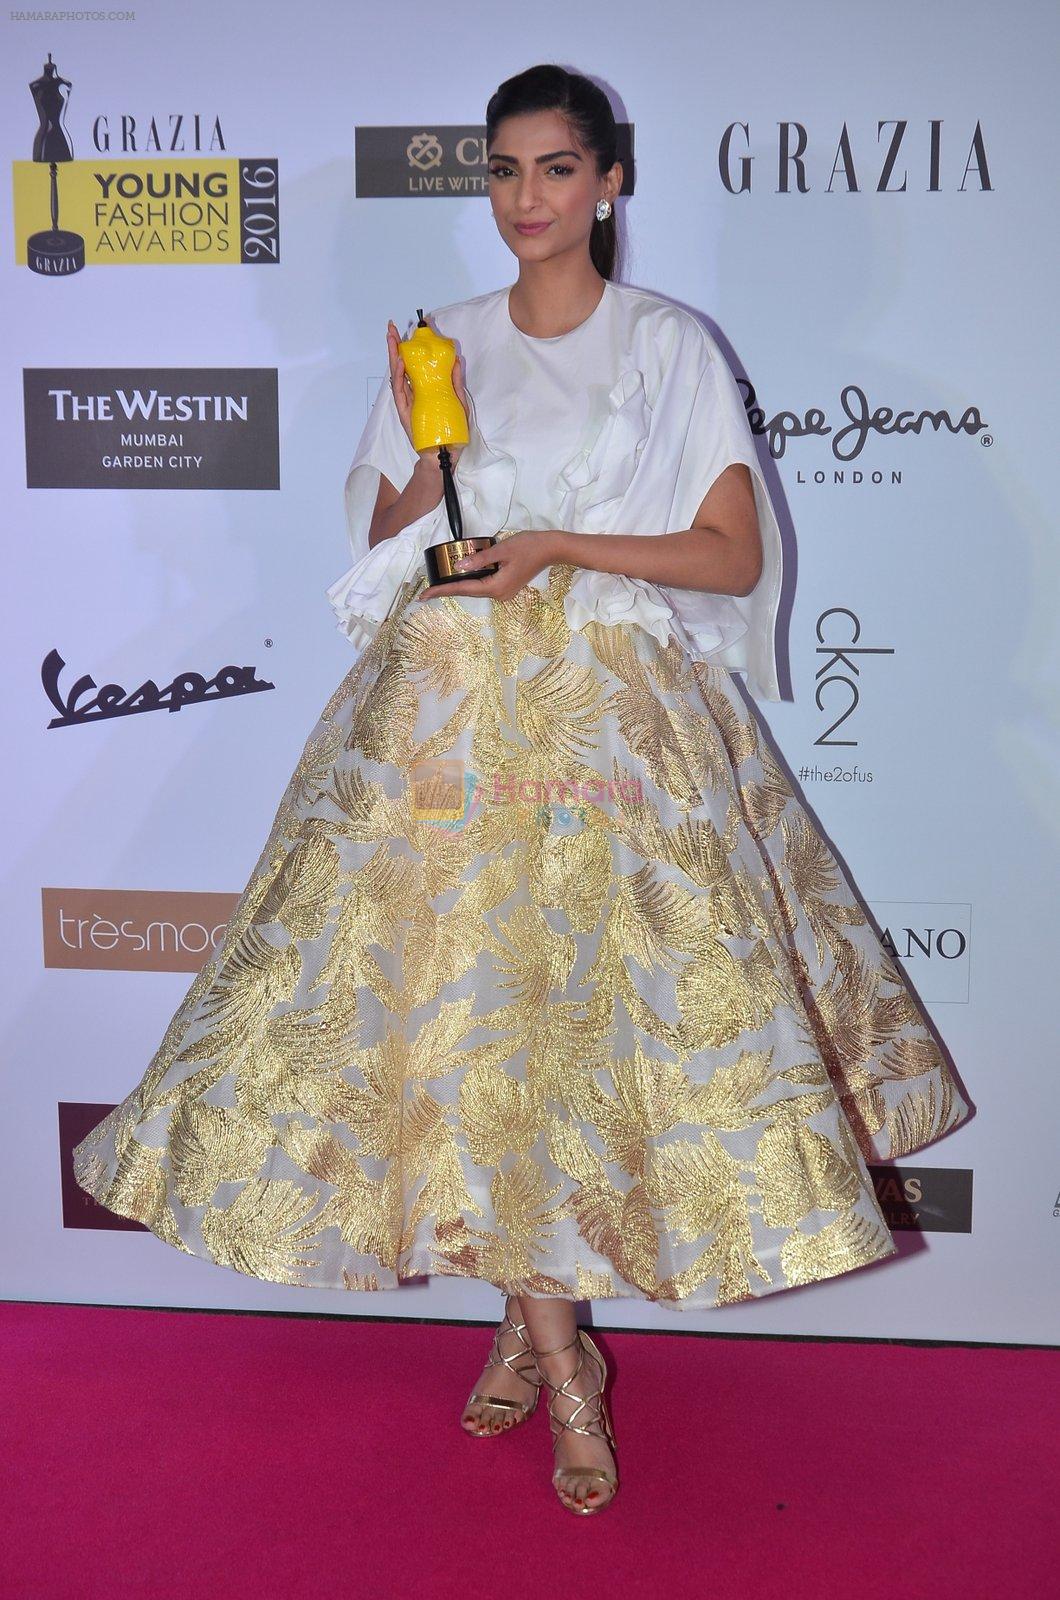 Sonam Kapoor at Grazia Young Fashion Awards 2016 Red Carpet on 7th April 2016